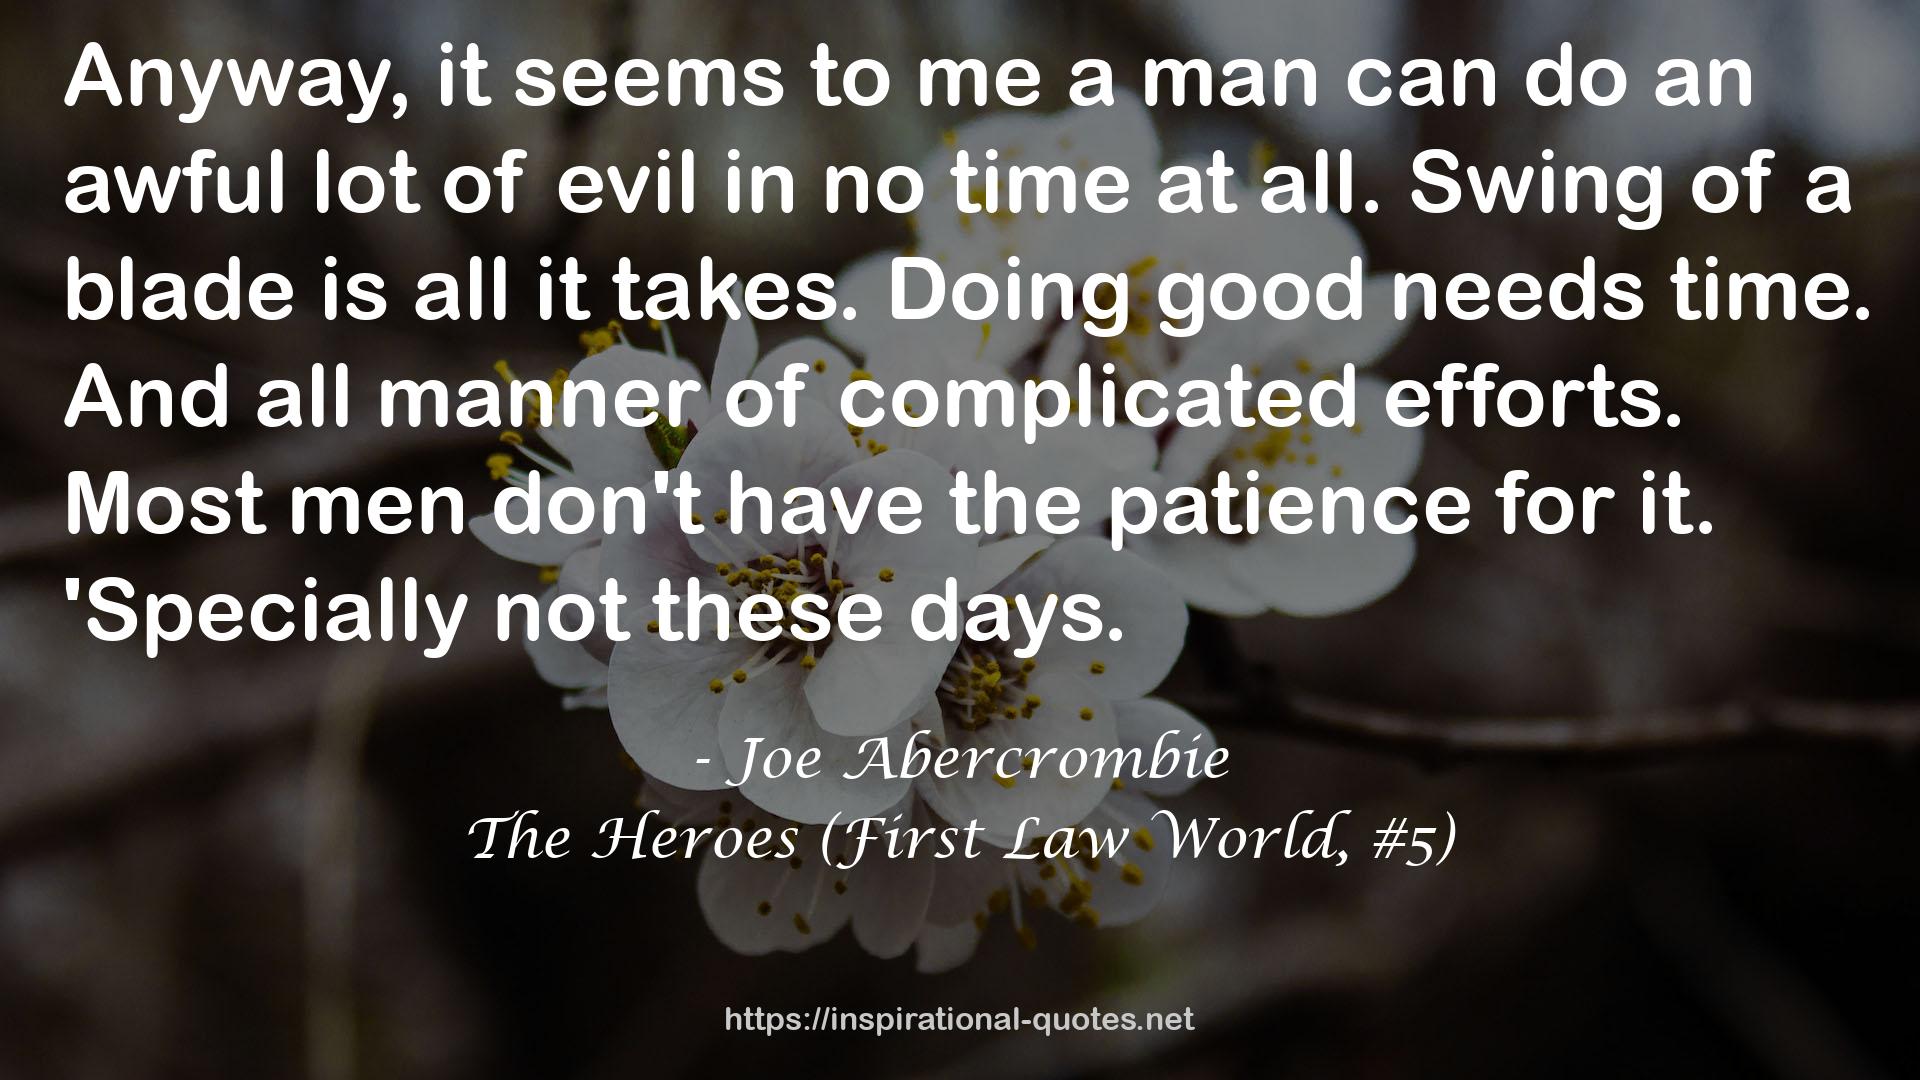 The Heroes (First Law World, #5) QUOTES